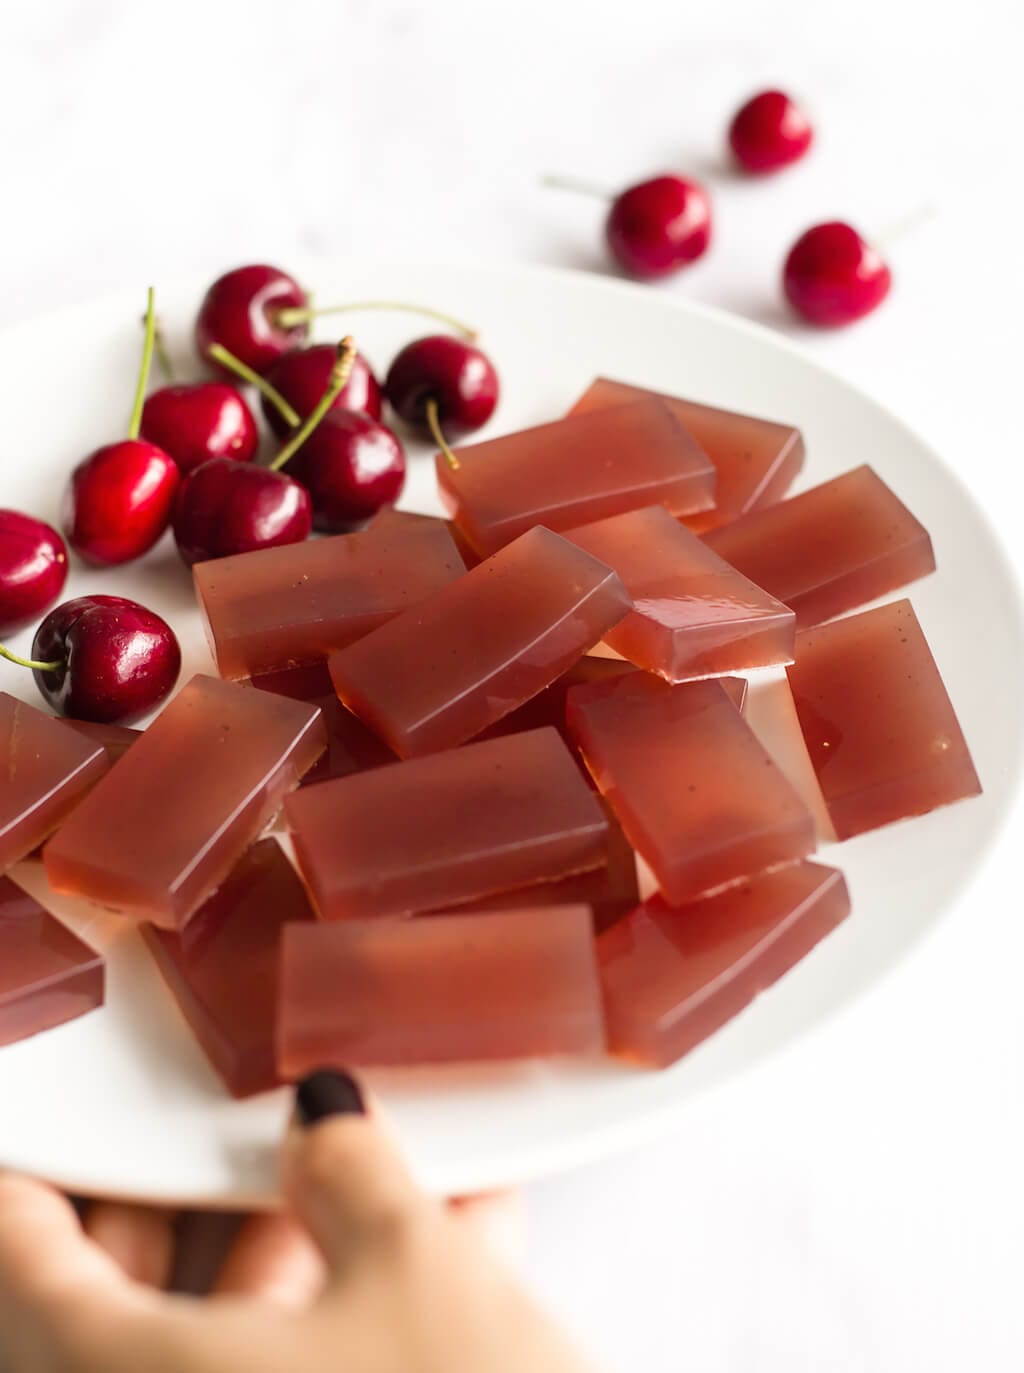 Chewy, addictive gummies made with completely natural ingredients, these are super easy to make. Plus, the recipe can be doubled or tripled to stock up.